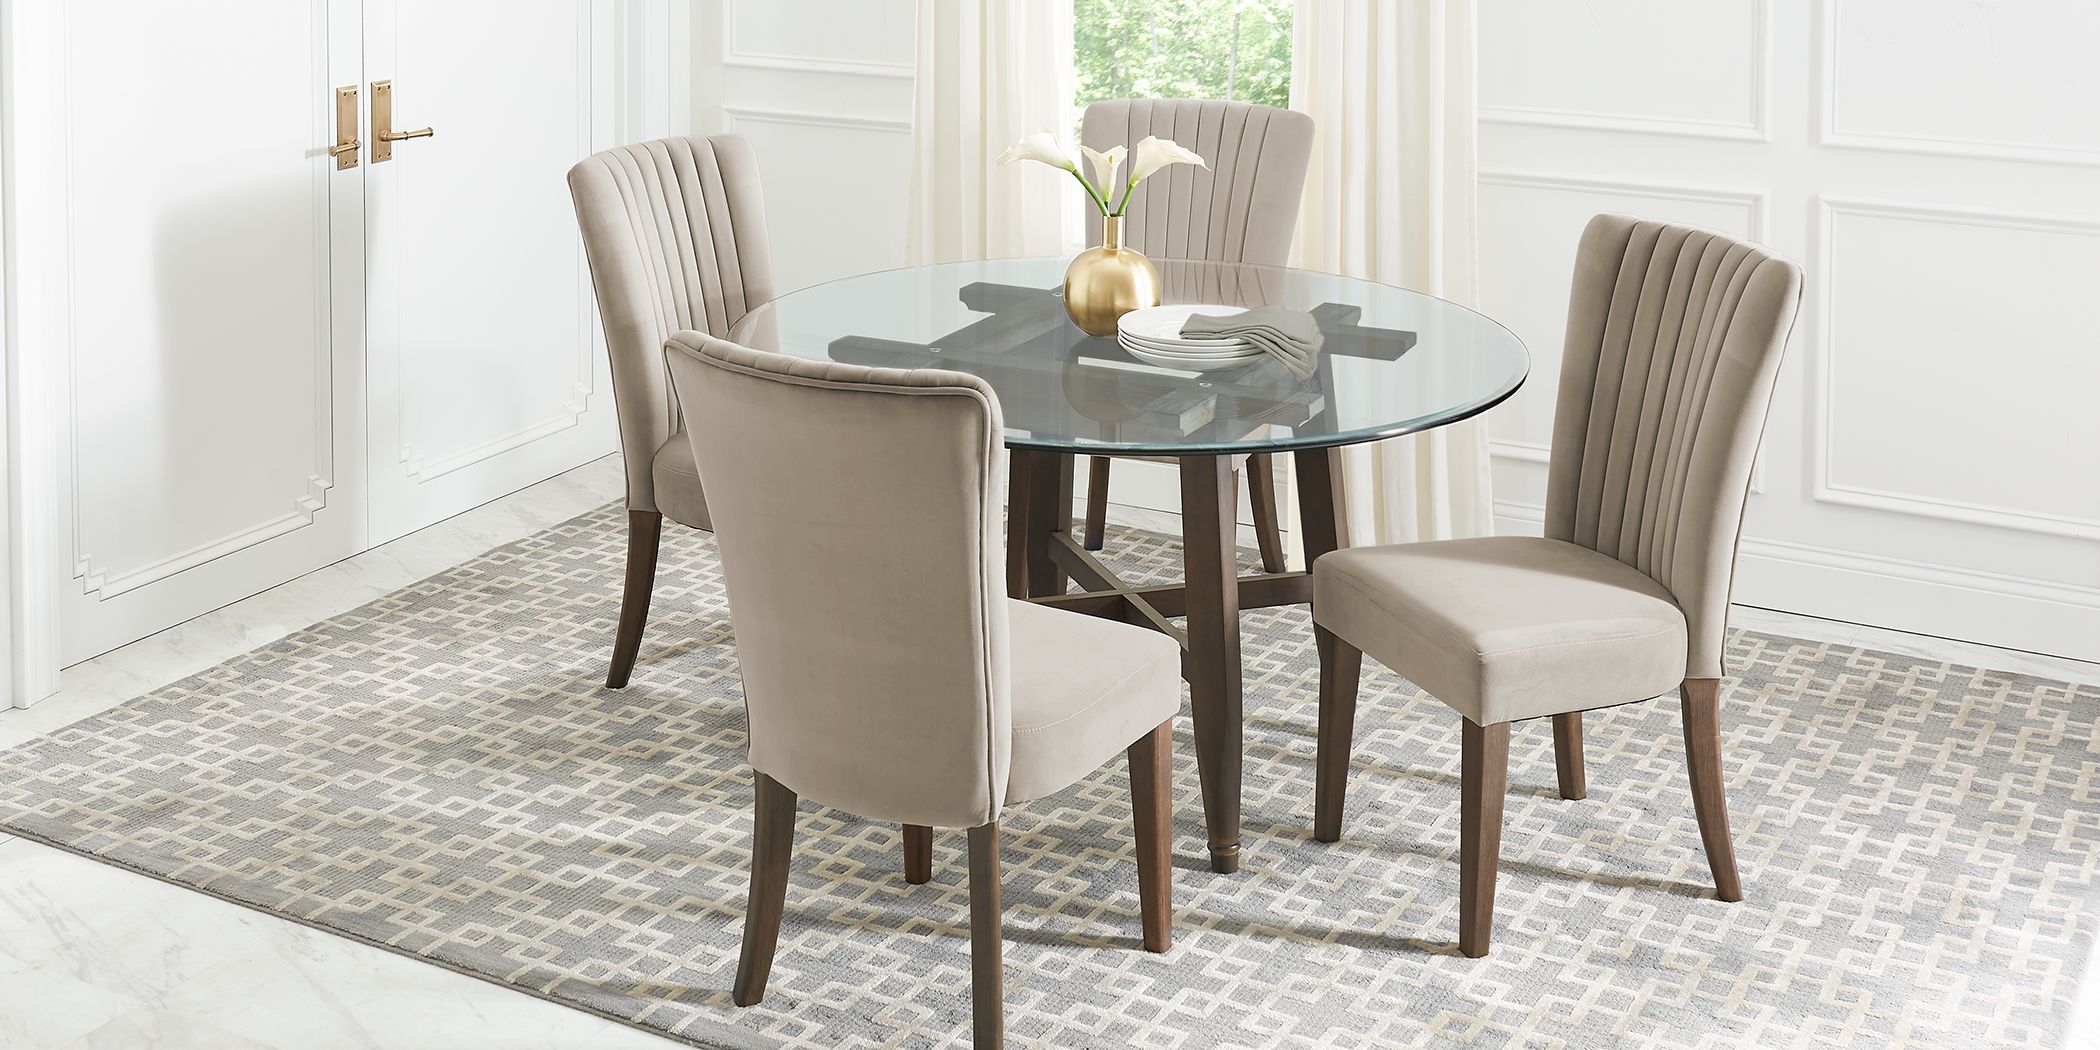 Woodland Avenue Brown 5 Pc Round Dining Set with Beige Chairs - Rooms To Go